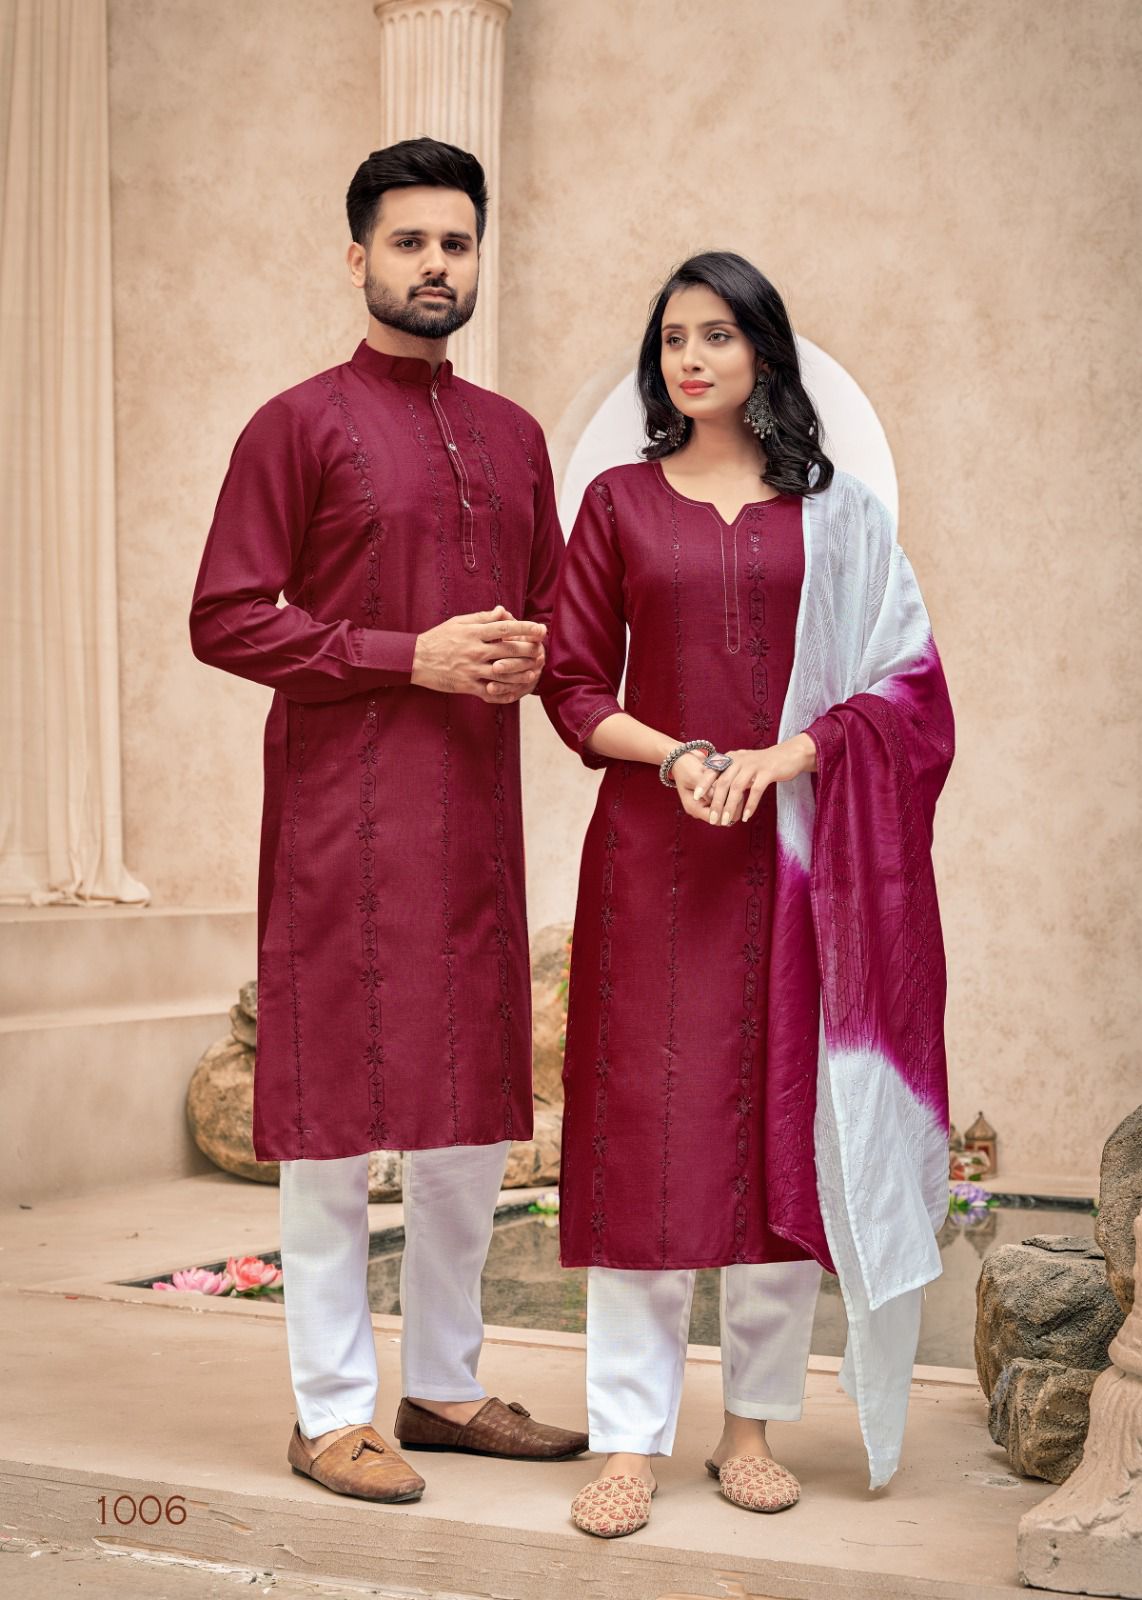 Matching couples top 30+ ideas dresess for wedding Top class couple dress's  collection of 2020… | Wedding matching outfits, Engagement dress for groom, Couple  dress